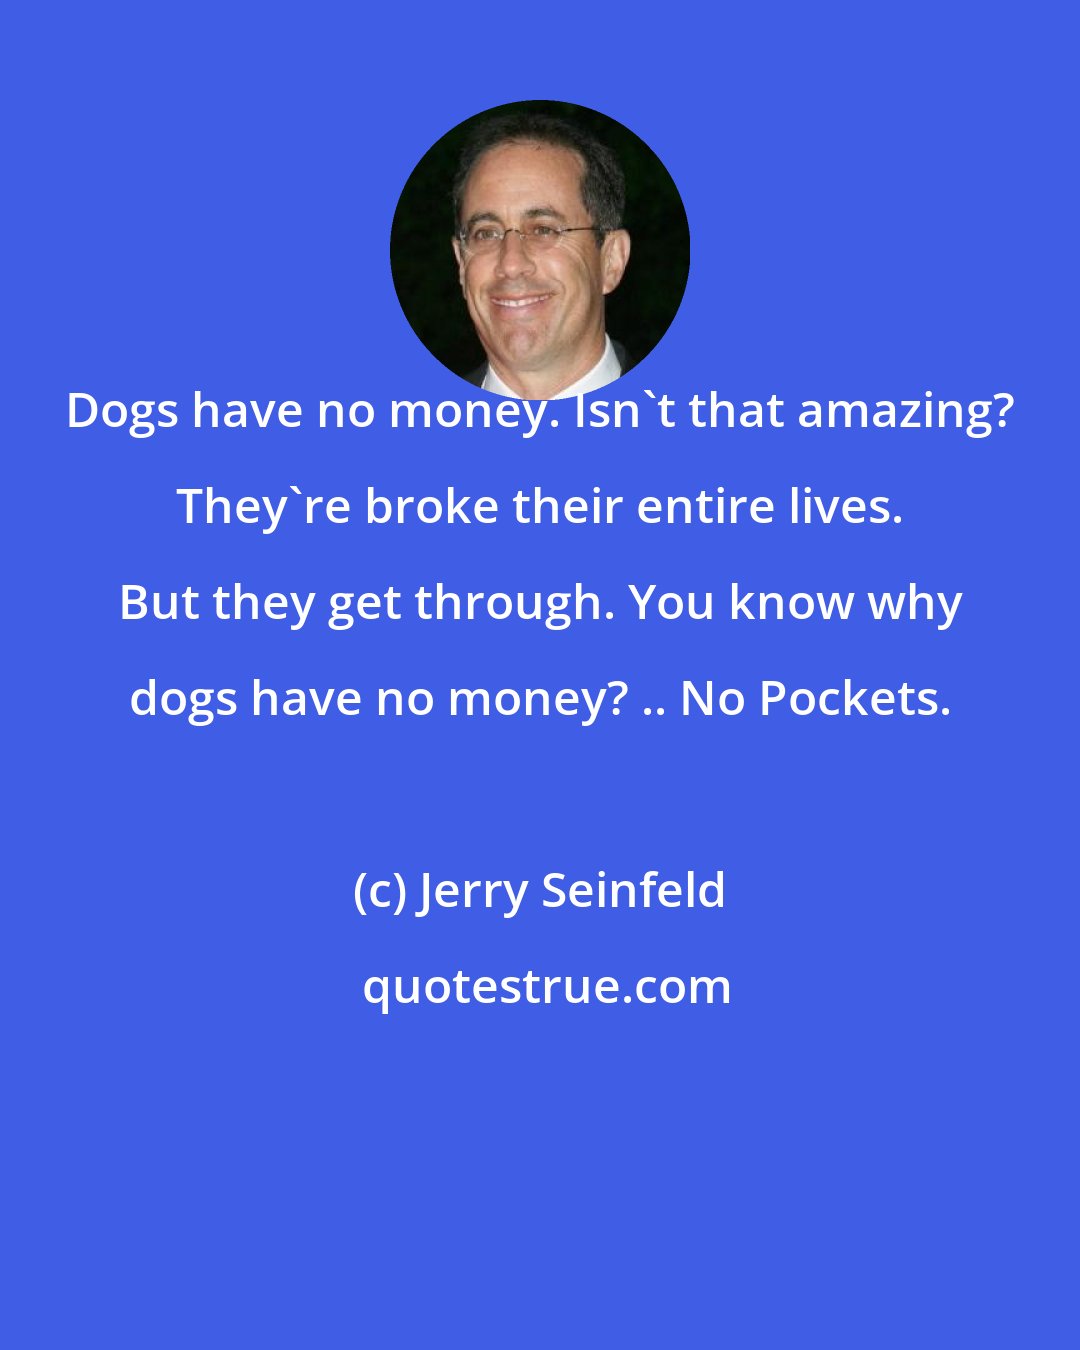 Jerry Seinfeld: Dogs have no money. Isn't that amazing? They're broke their entire lives. But they get through. You know why dogs have no money? .. No Pockets.